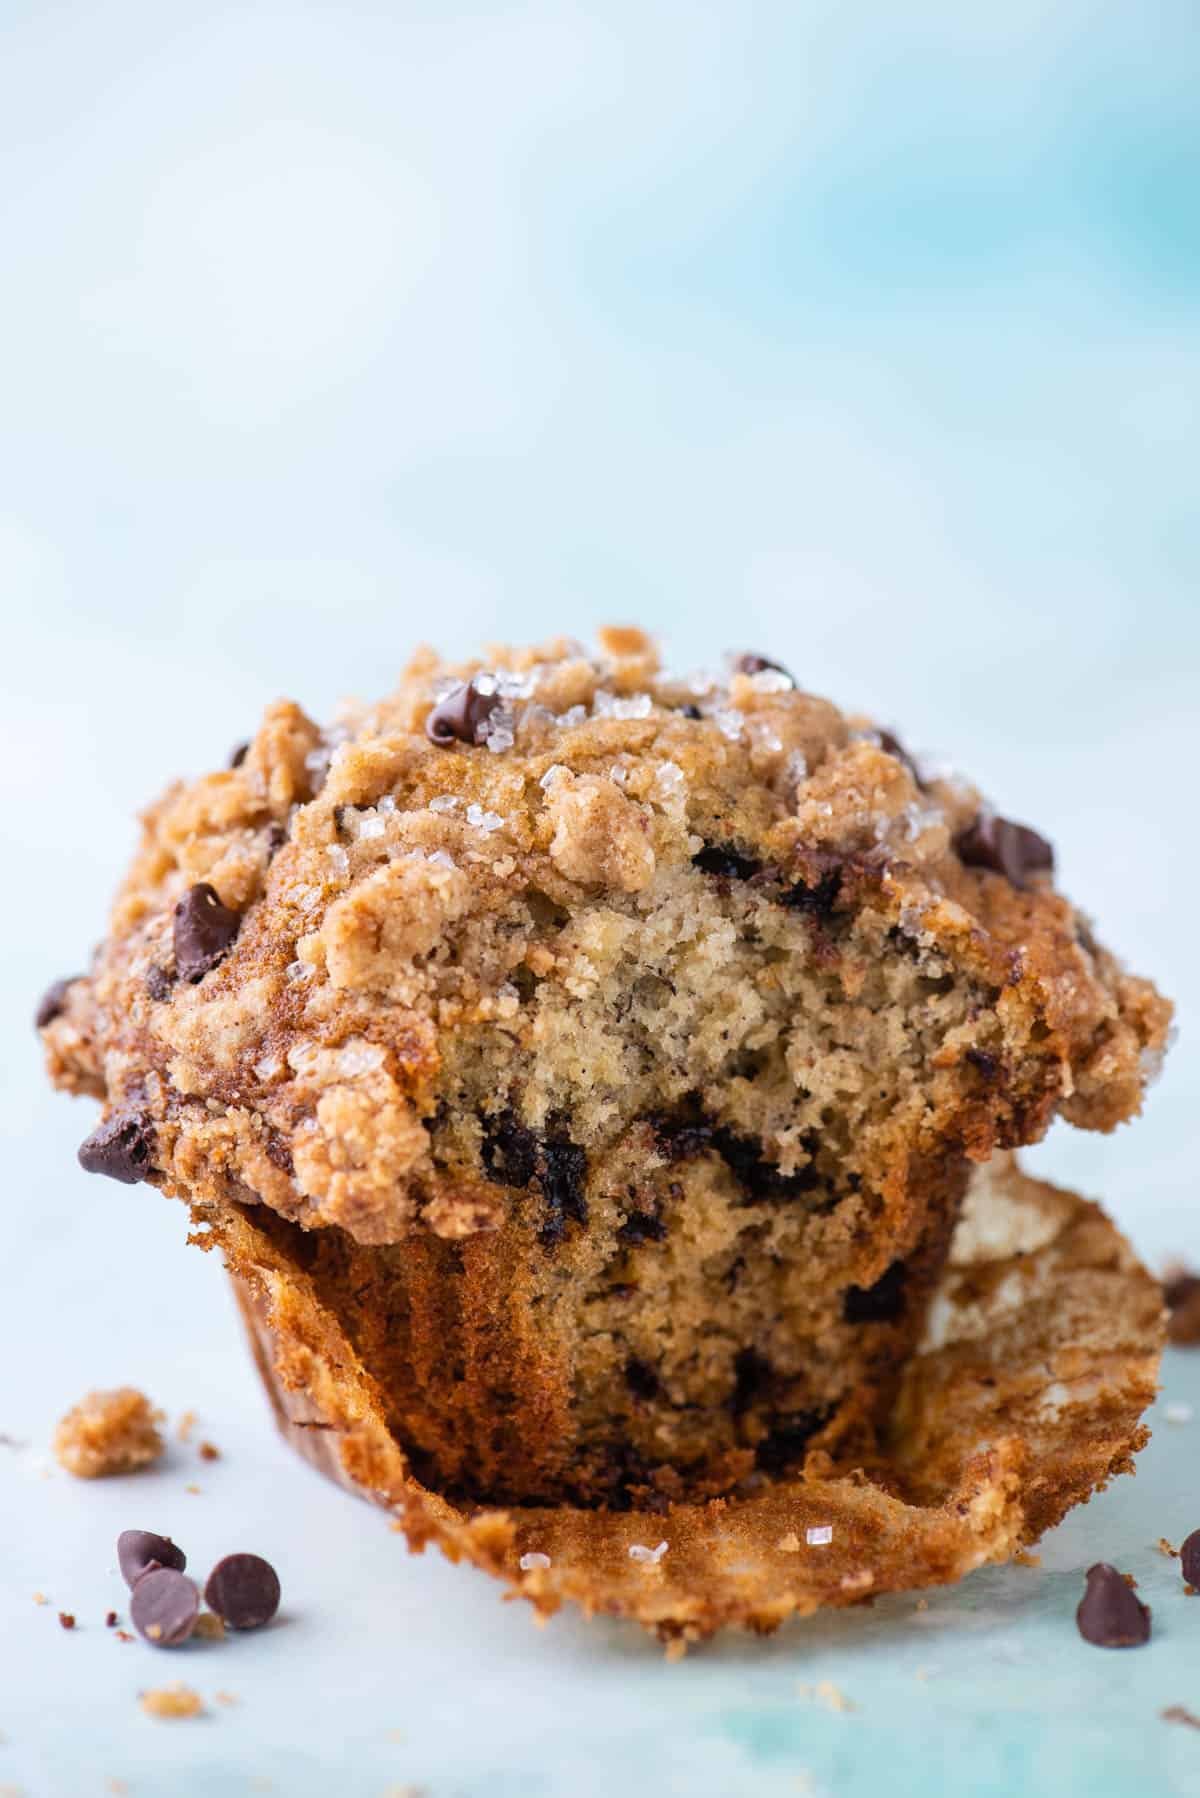 a banana chocolate chip muffin sitting on a light teal surface with its muffin liner peeled partially open, a bite taken out of the muffin, surrounded by muffin crumbs and mini chocolate chips